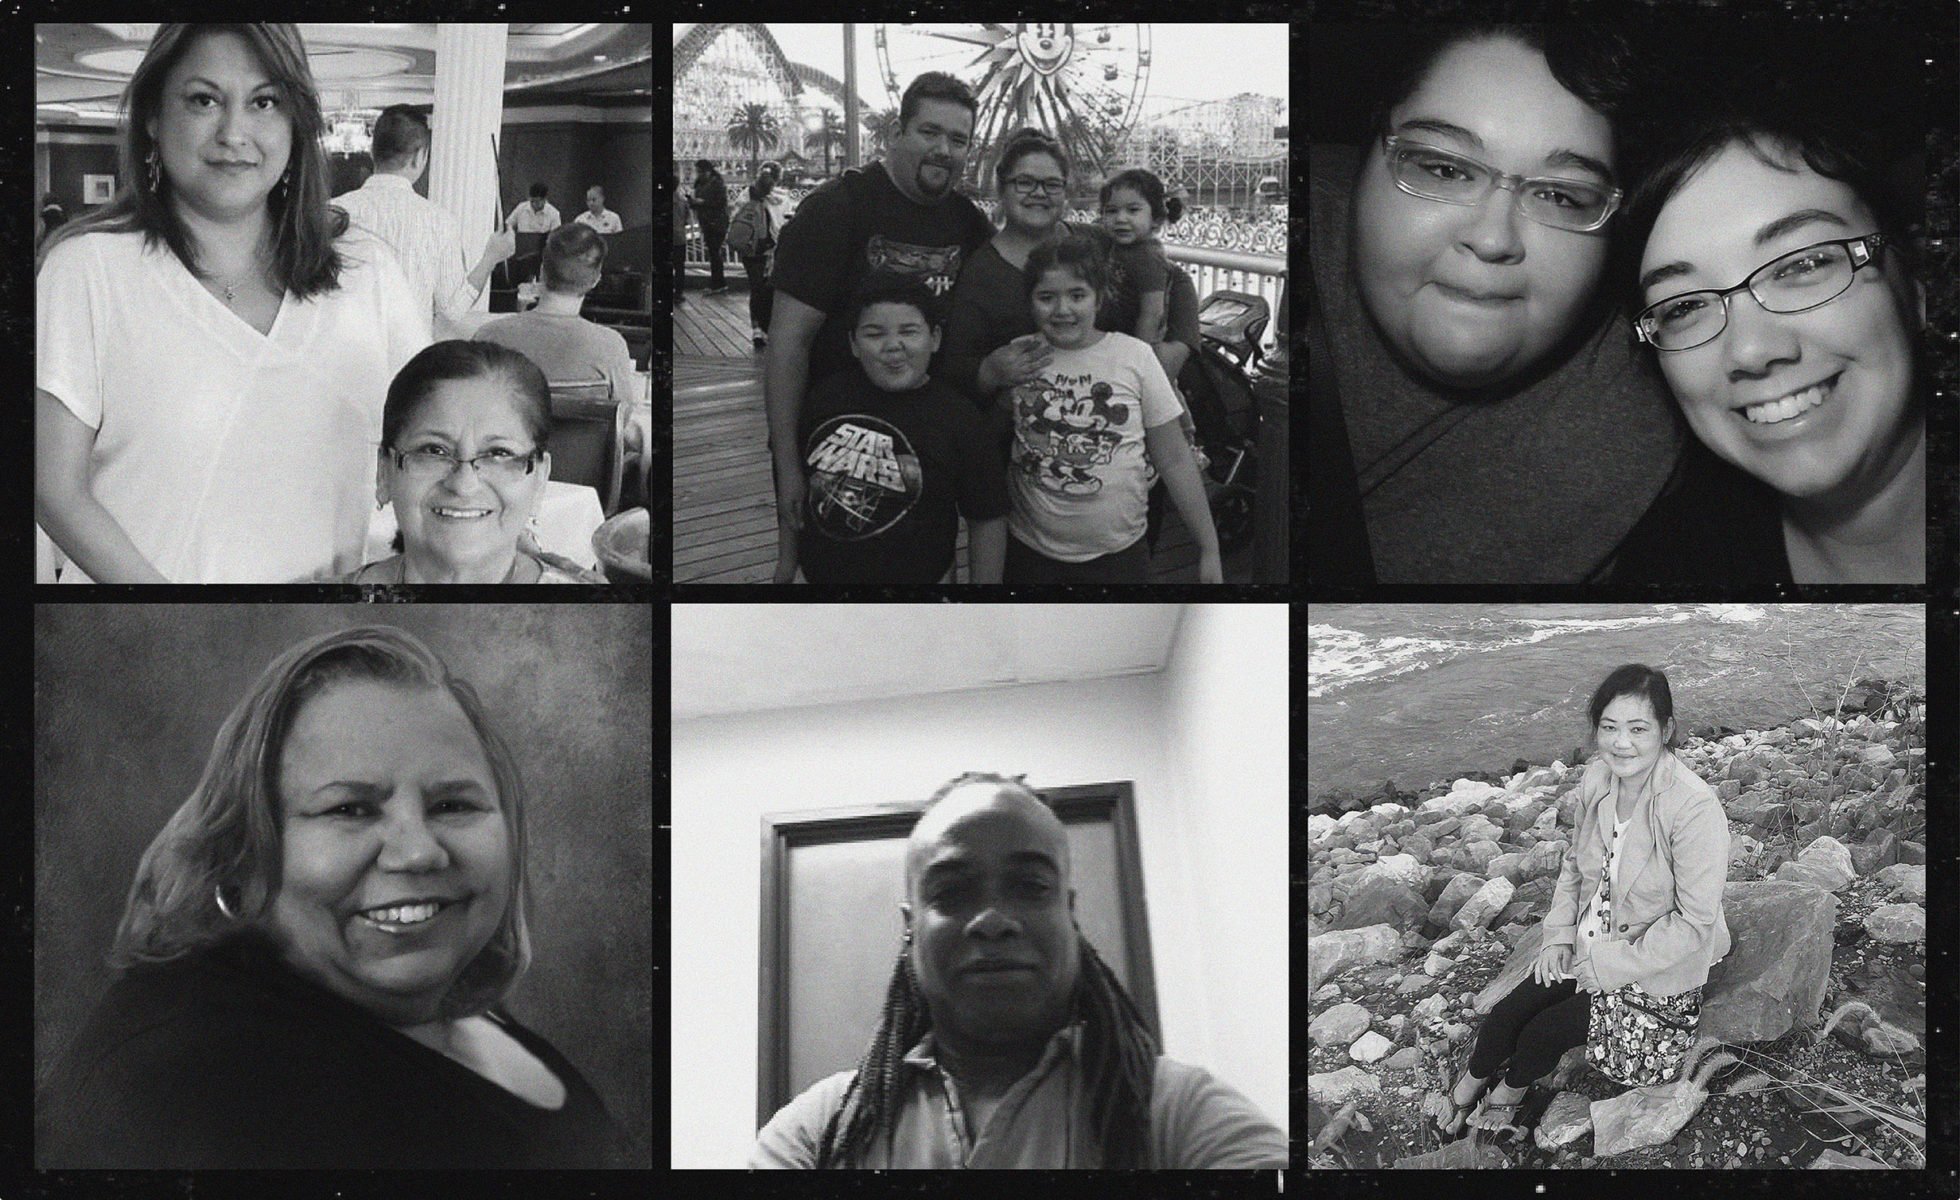 Clockwise from top left: Casandra Gonzalez with Yolanda Reyes; Daniel Morales, an El Paso nurse who died in August, with family; Jessica Fajardo, an Odessa phlebotomist who died in April, with a friend; Pwar Gay, an Amarillo meat processing worker who died in May; Maurice Dotson; Margaret Ferguson, who worked for a roofing company in Allen and died in October.